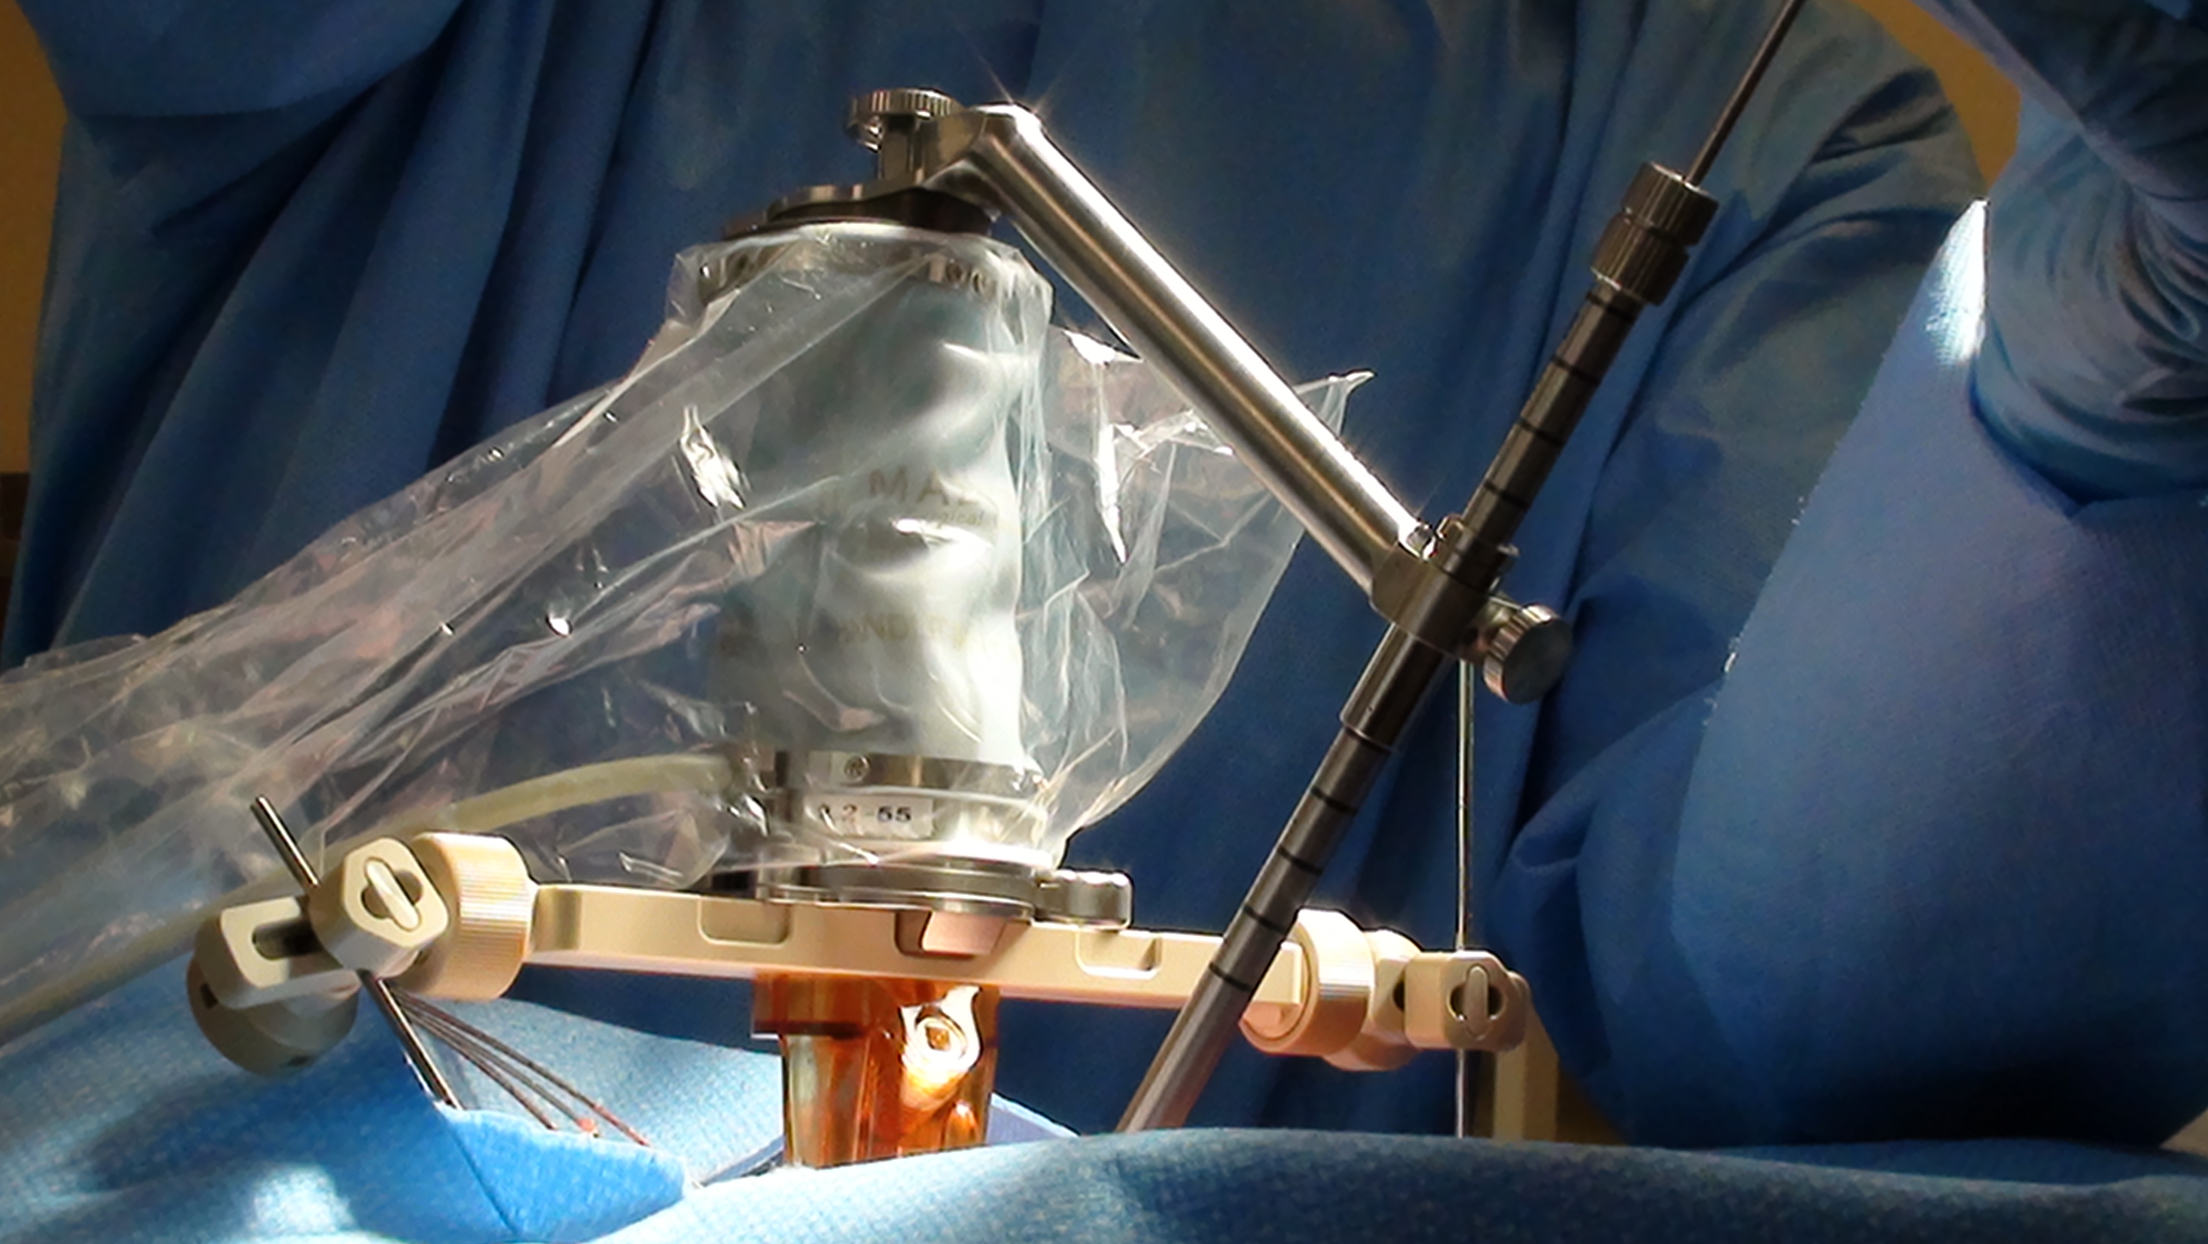 Mazor Renaissance Robot in use during surgery